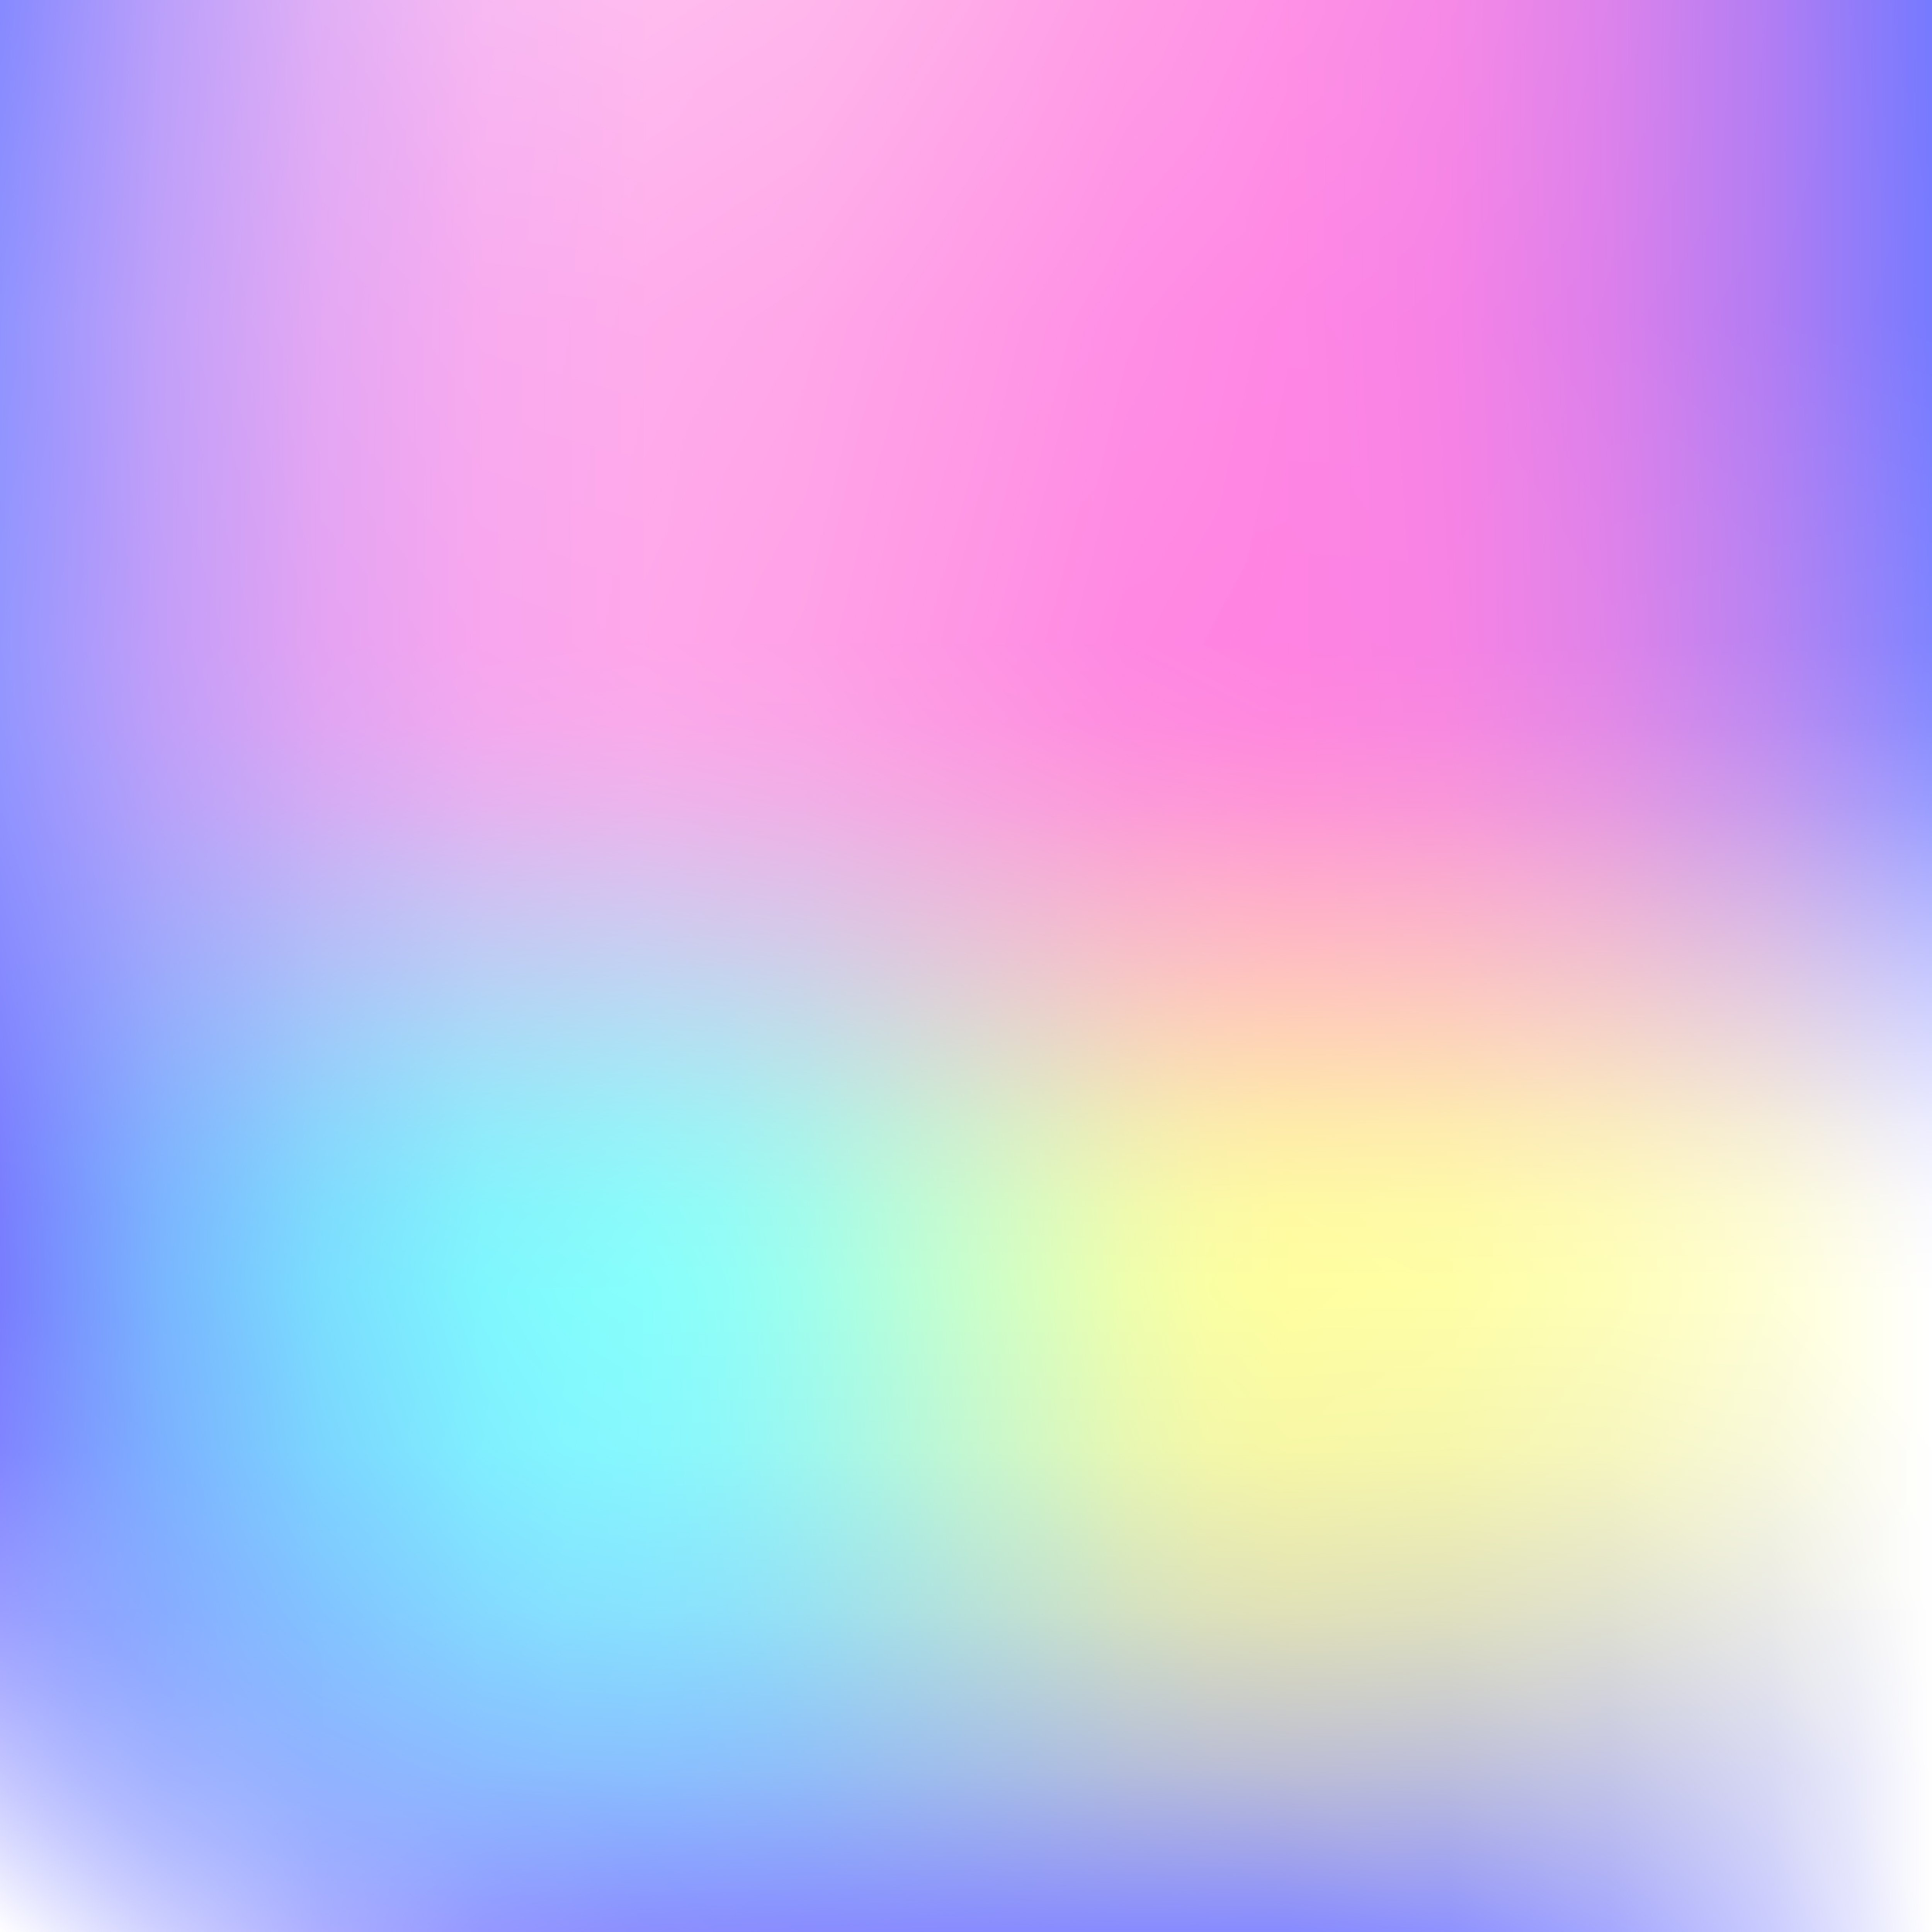 Abstract blur gradient background with trend pastel pink, purple